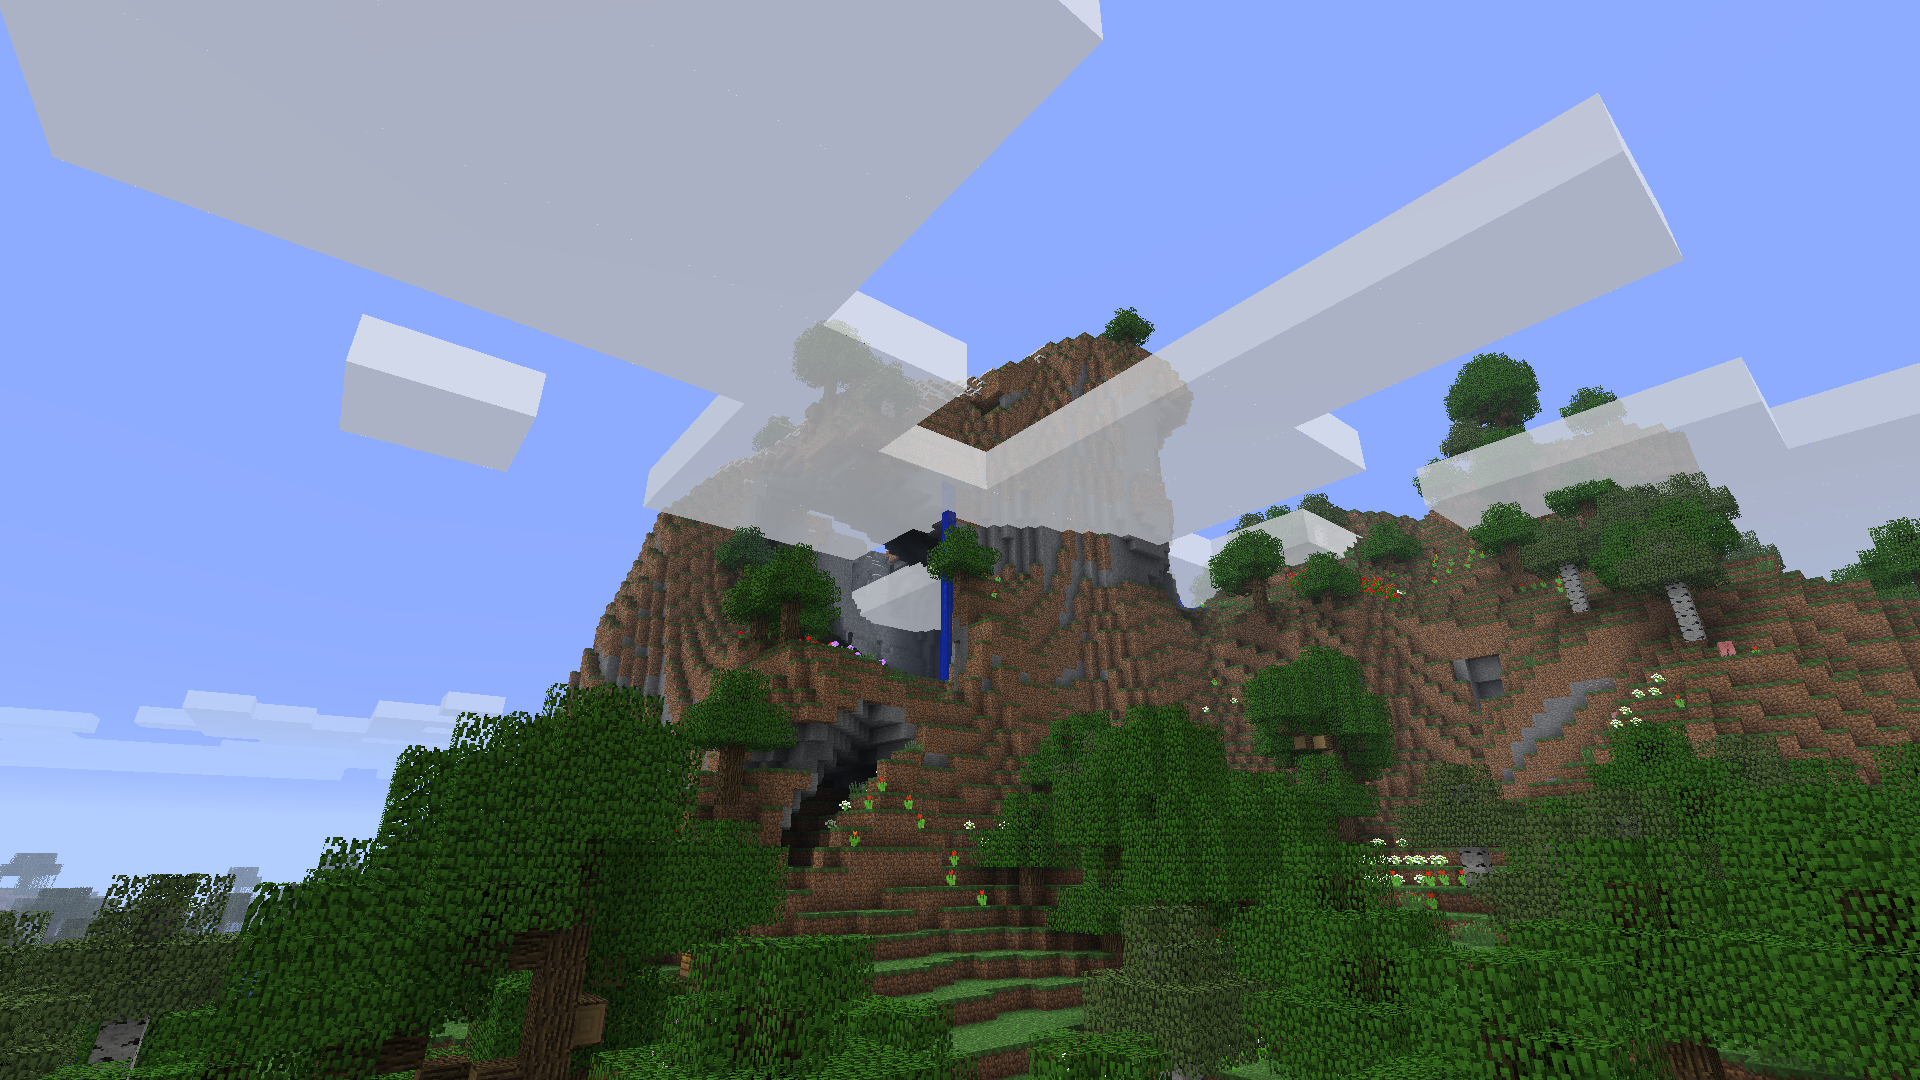 A mountainside surrounded by cliffs.